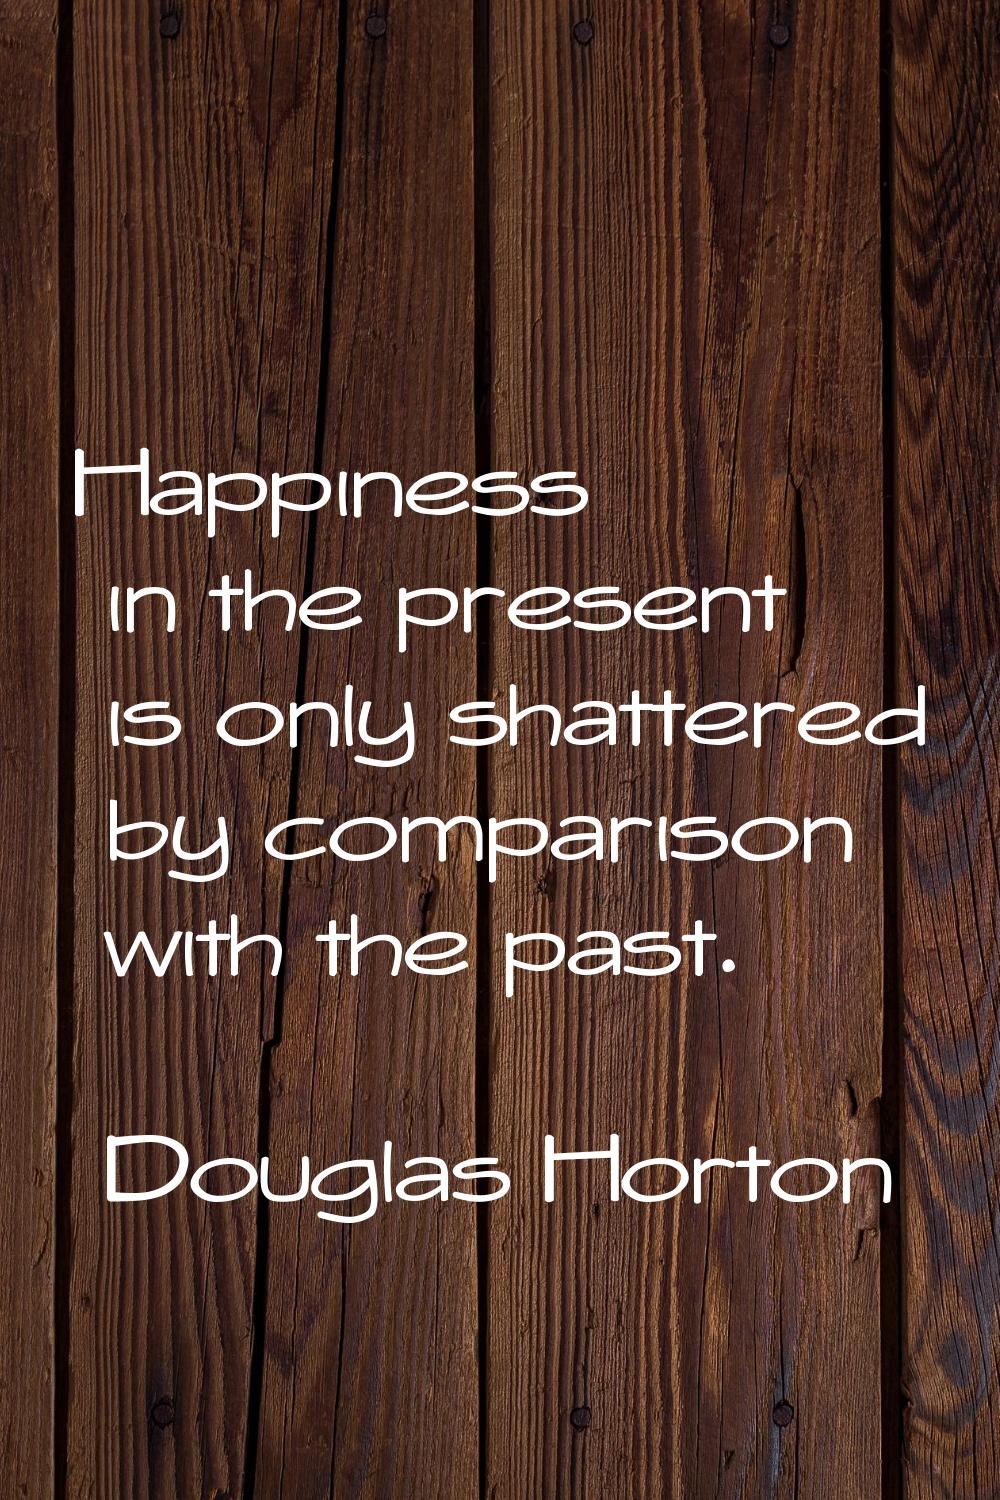 Happiness in the present is only shattered by comparison with the past.